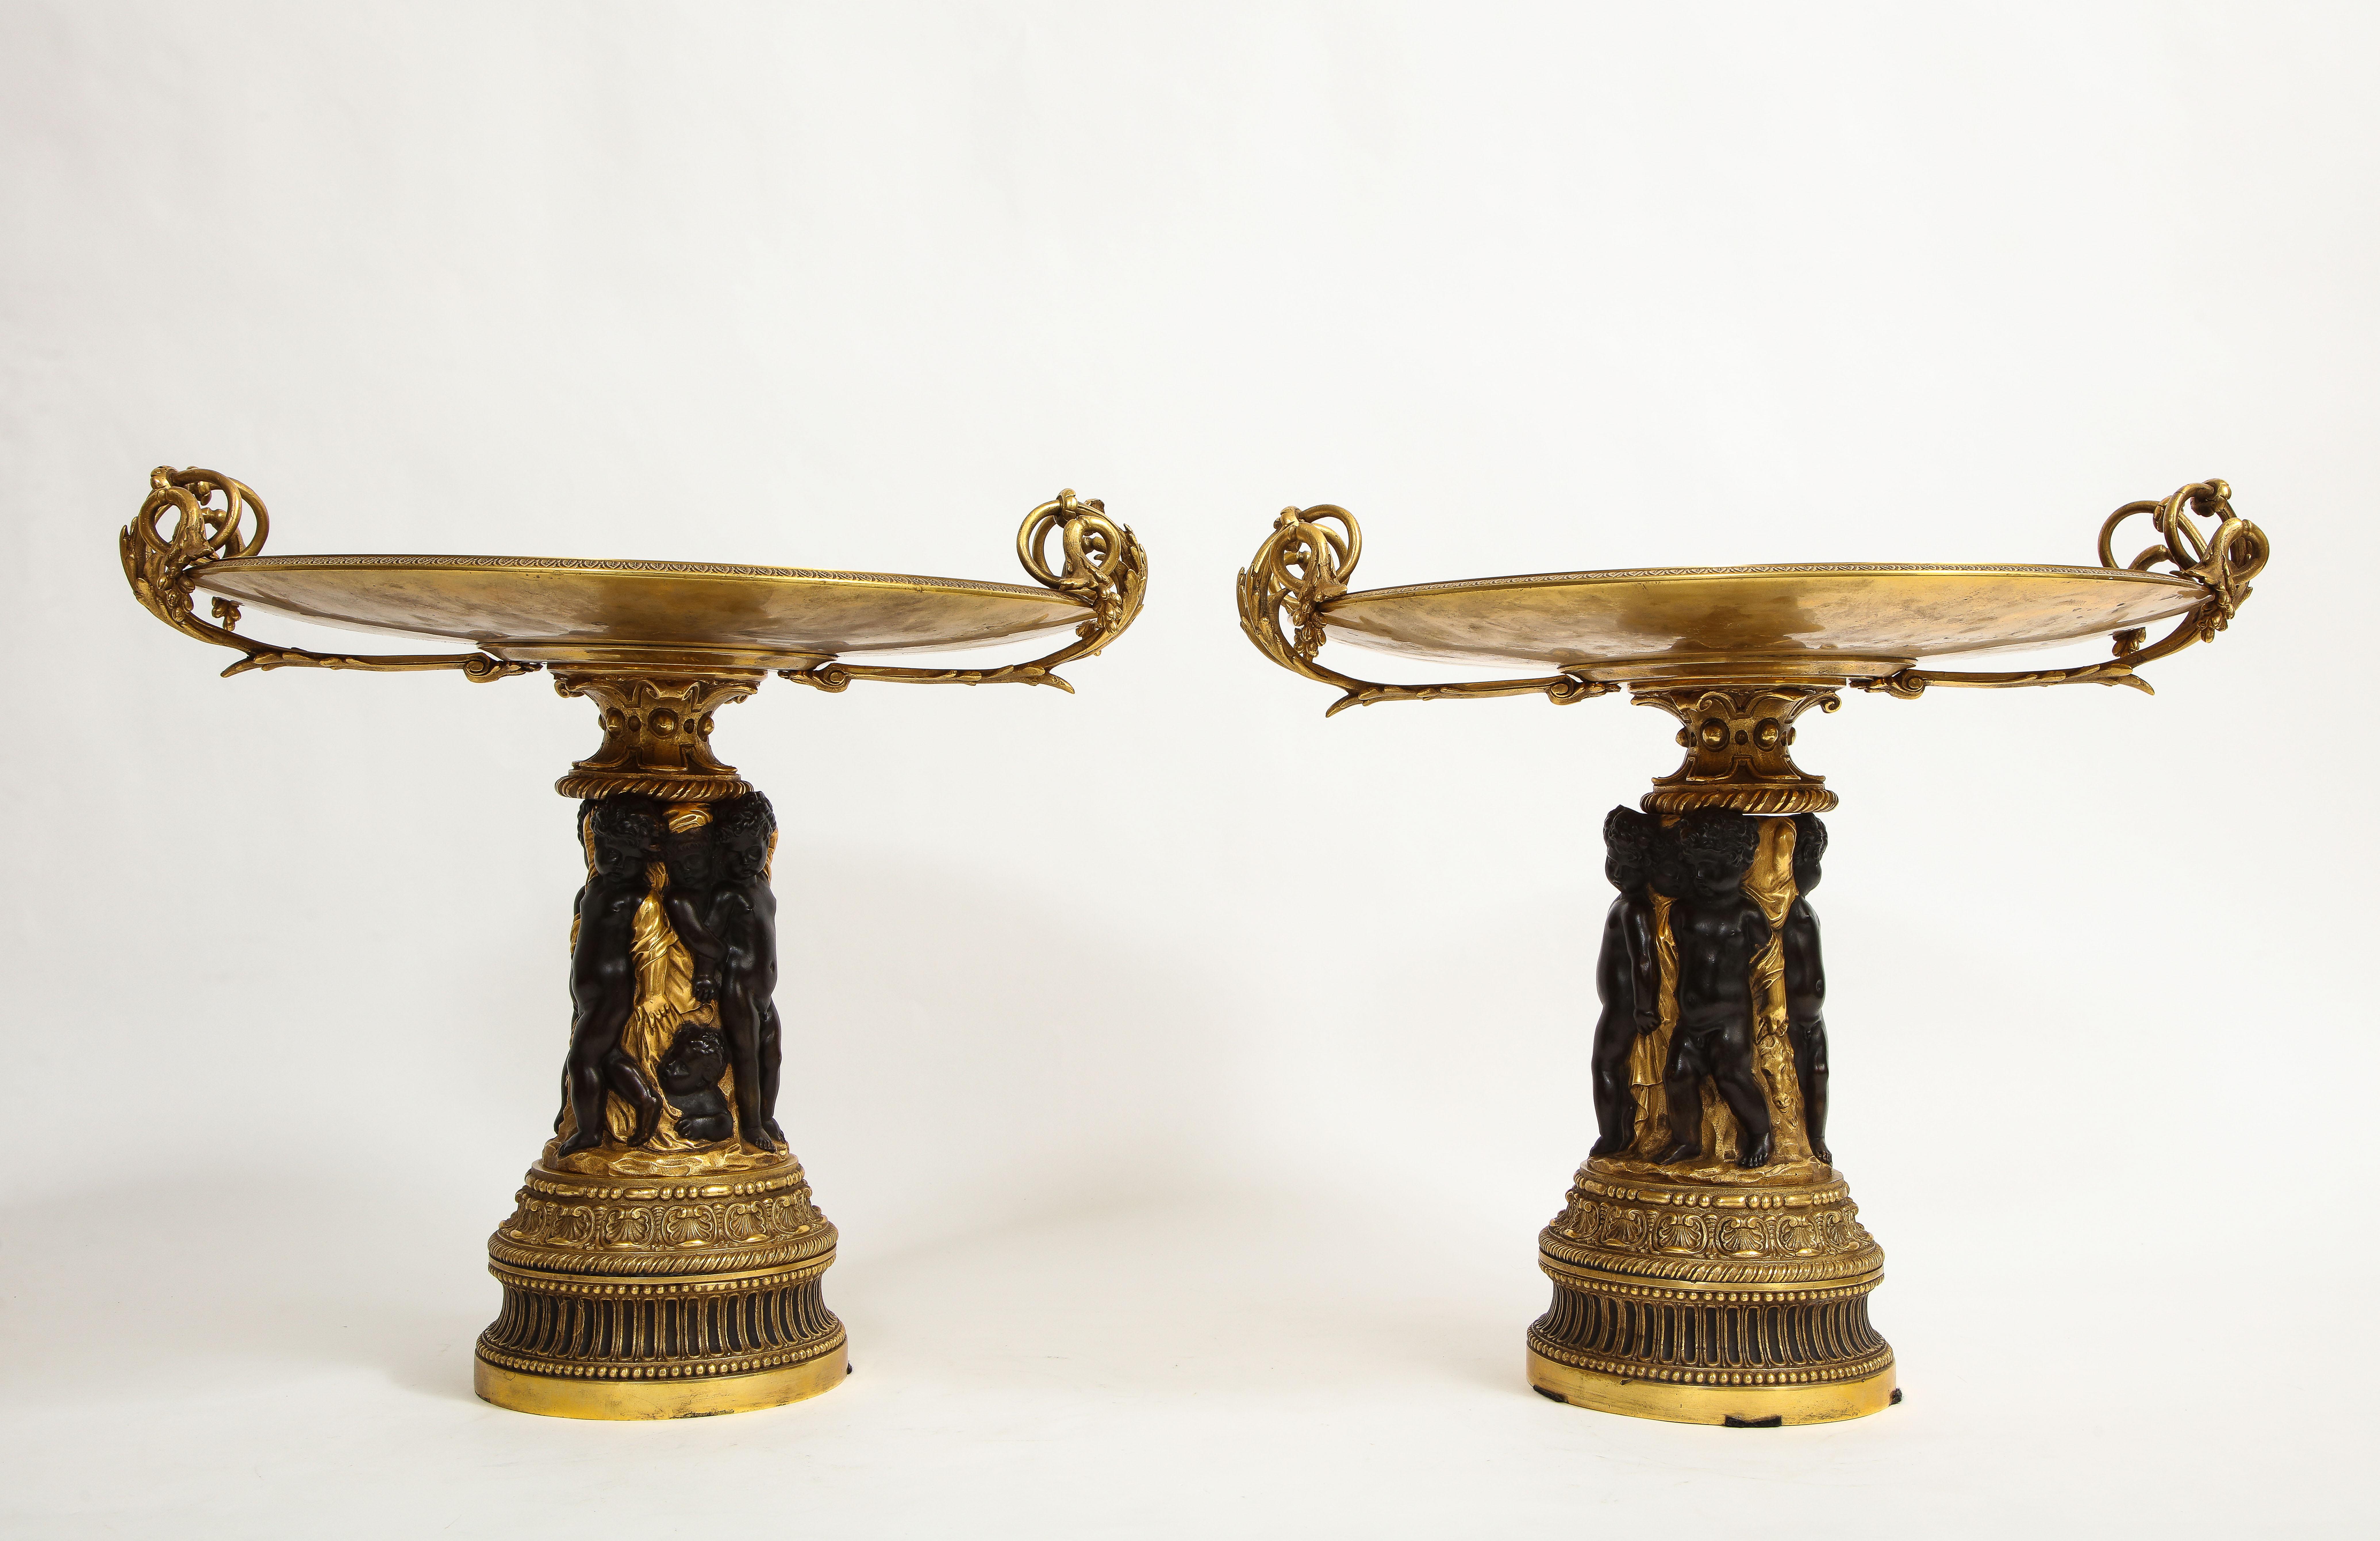 Gilt Pair of French 19th Century Dore and Patinated Bronze Handled Tazzas w/ Putti For Sale